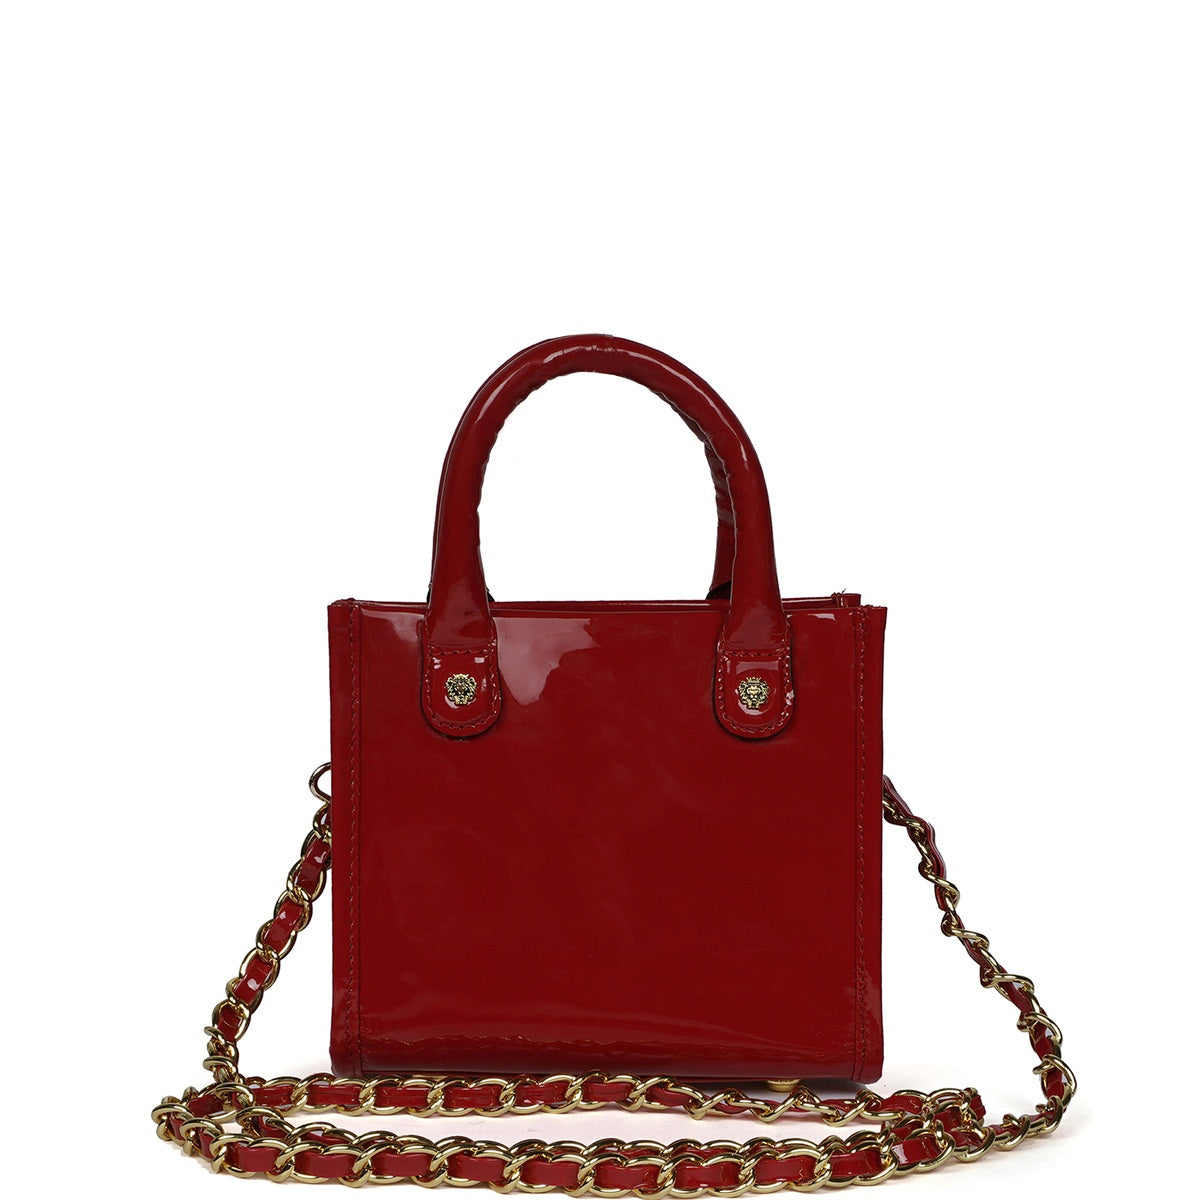 Mini Sized Hand Bag in Ruby Red Patent Leather